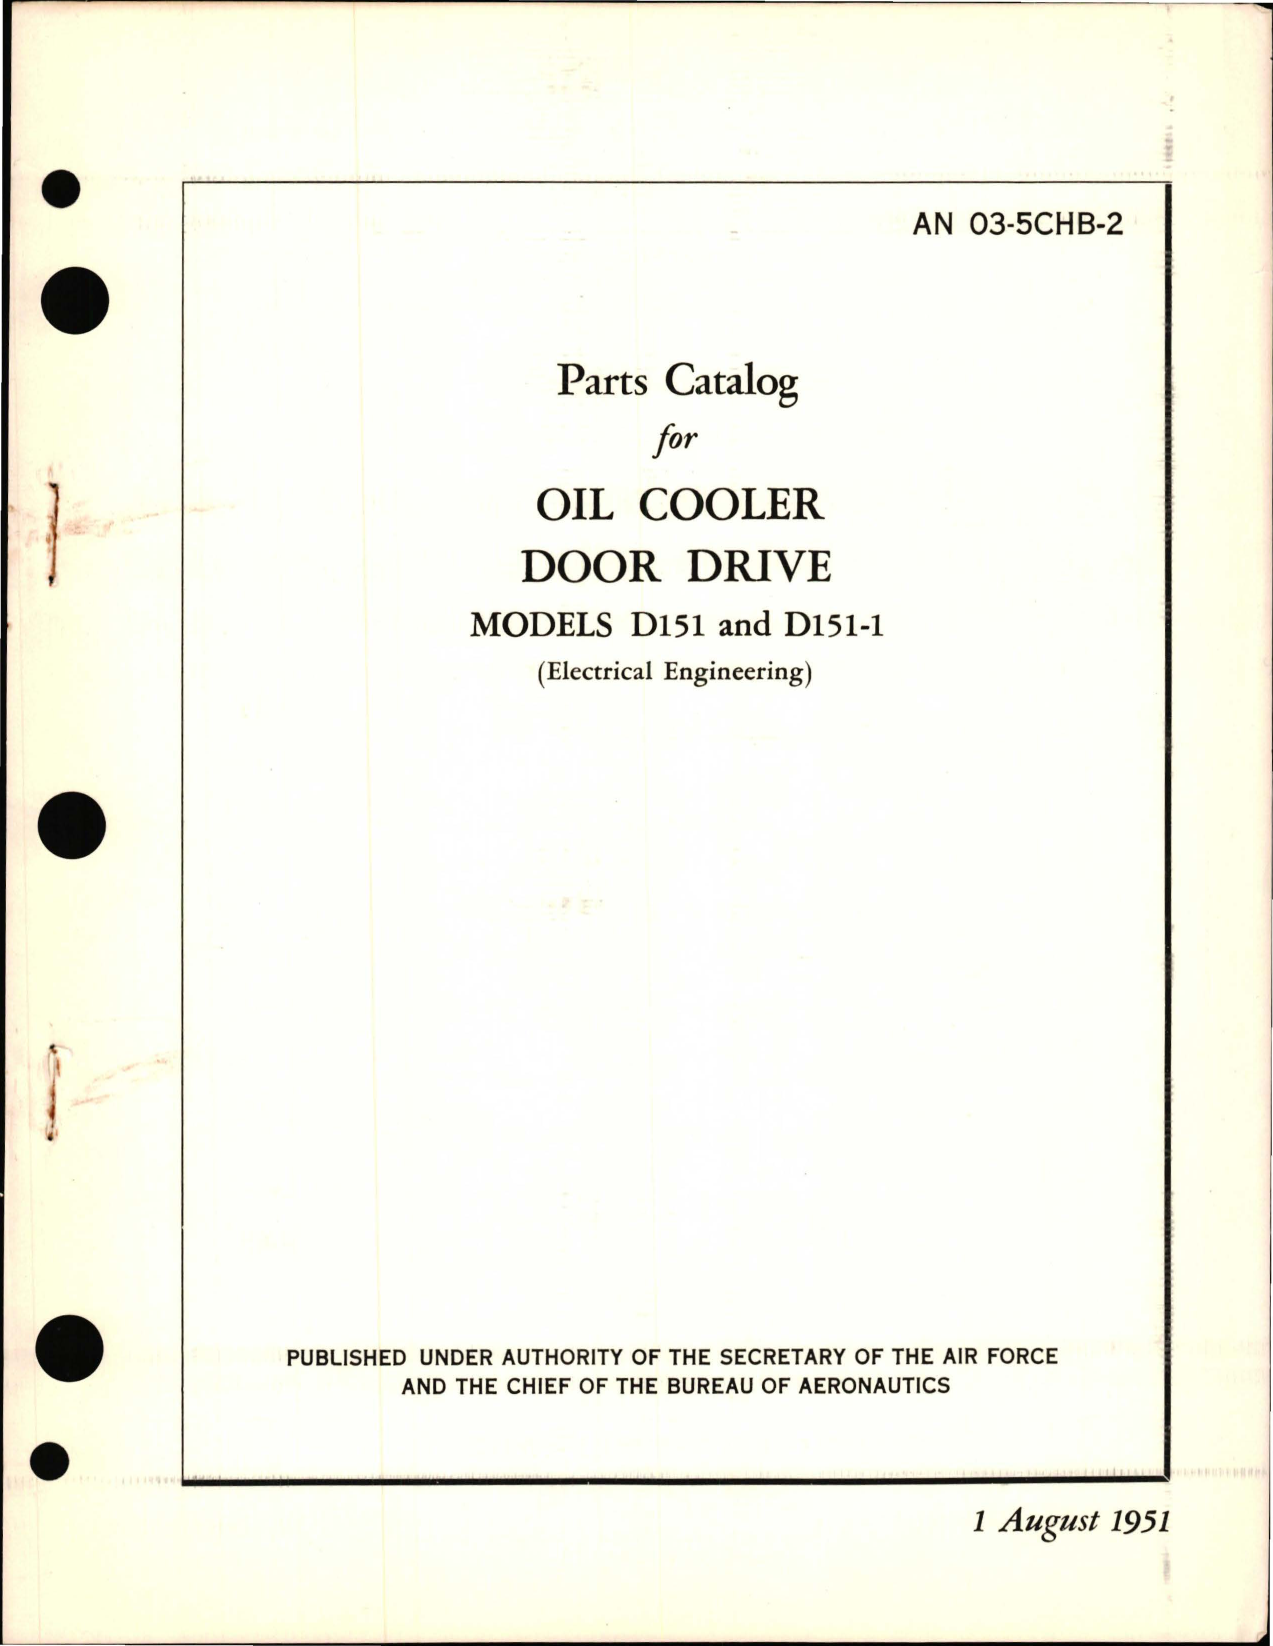 Sample page 1 from AirCorps Library document: Parts Catalog for Oil Cooler Door Drive - Models D151 and D151-1